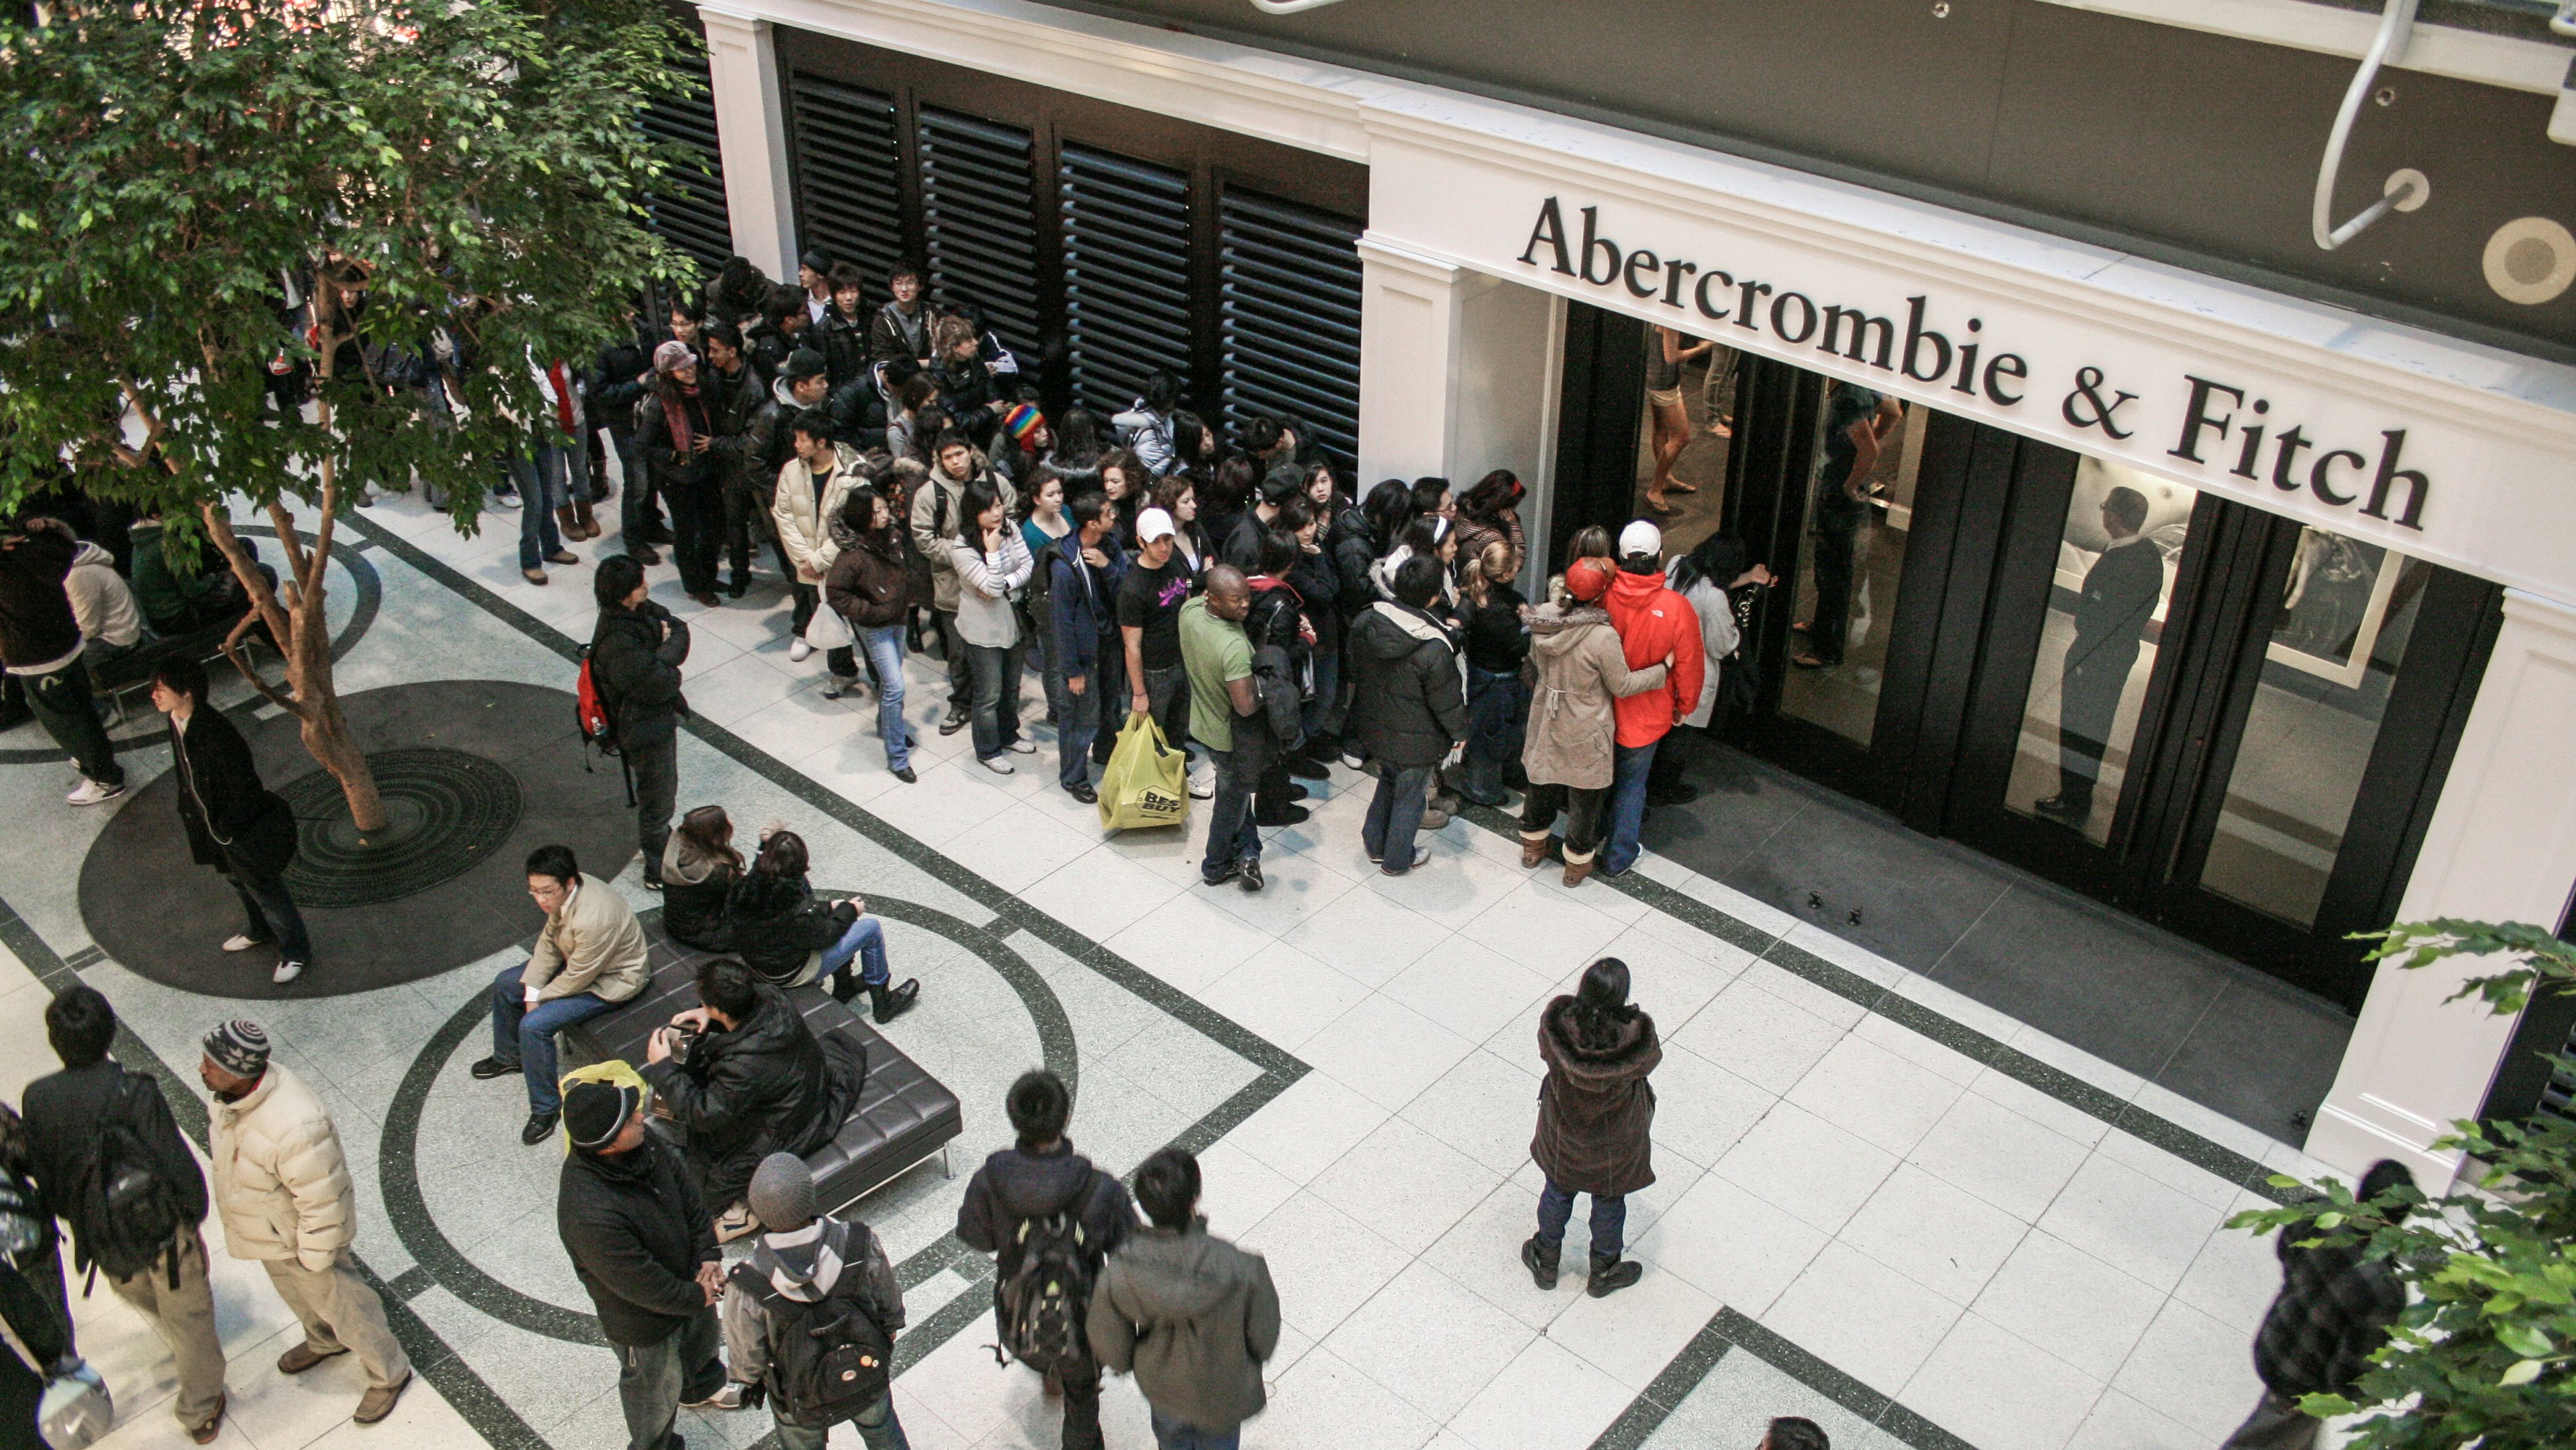 abercrombie & fitch us site